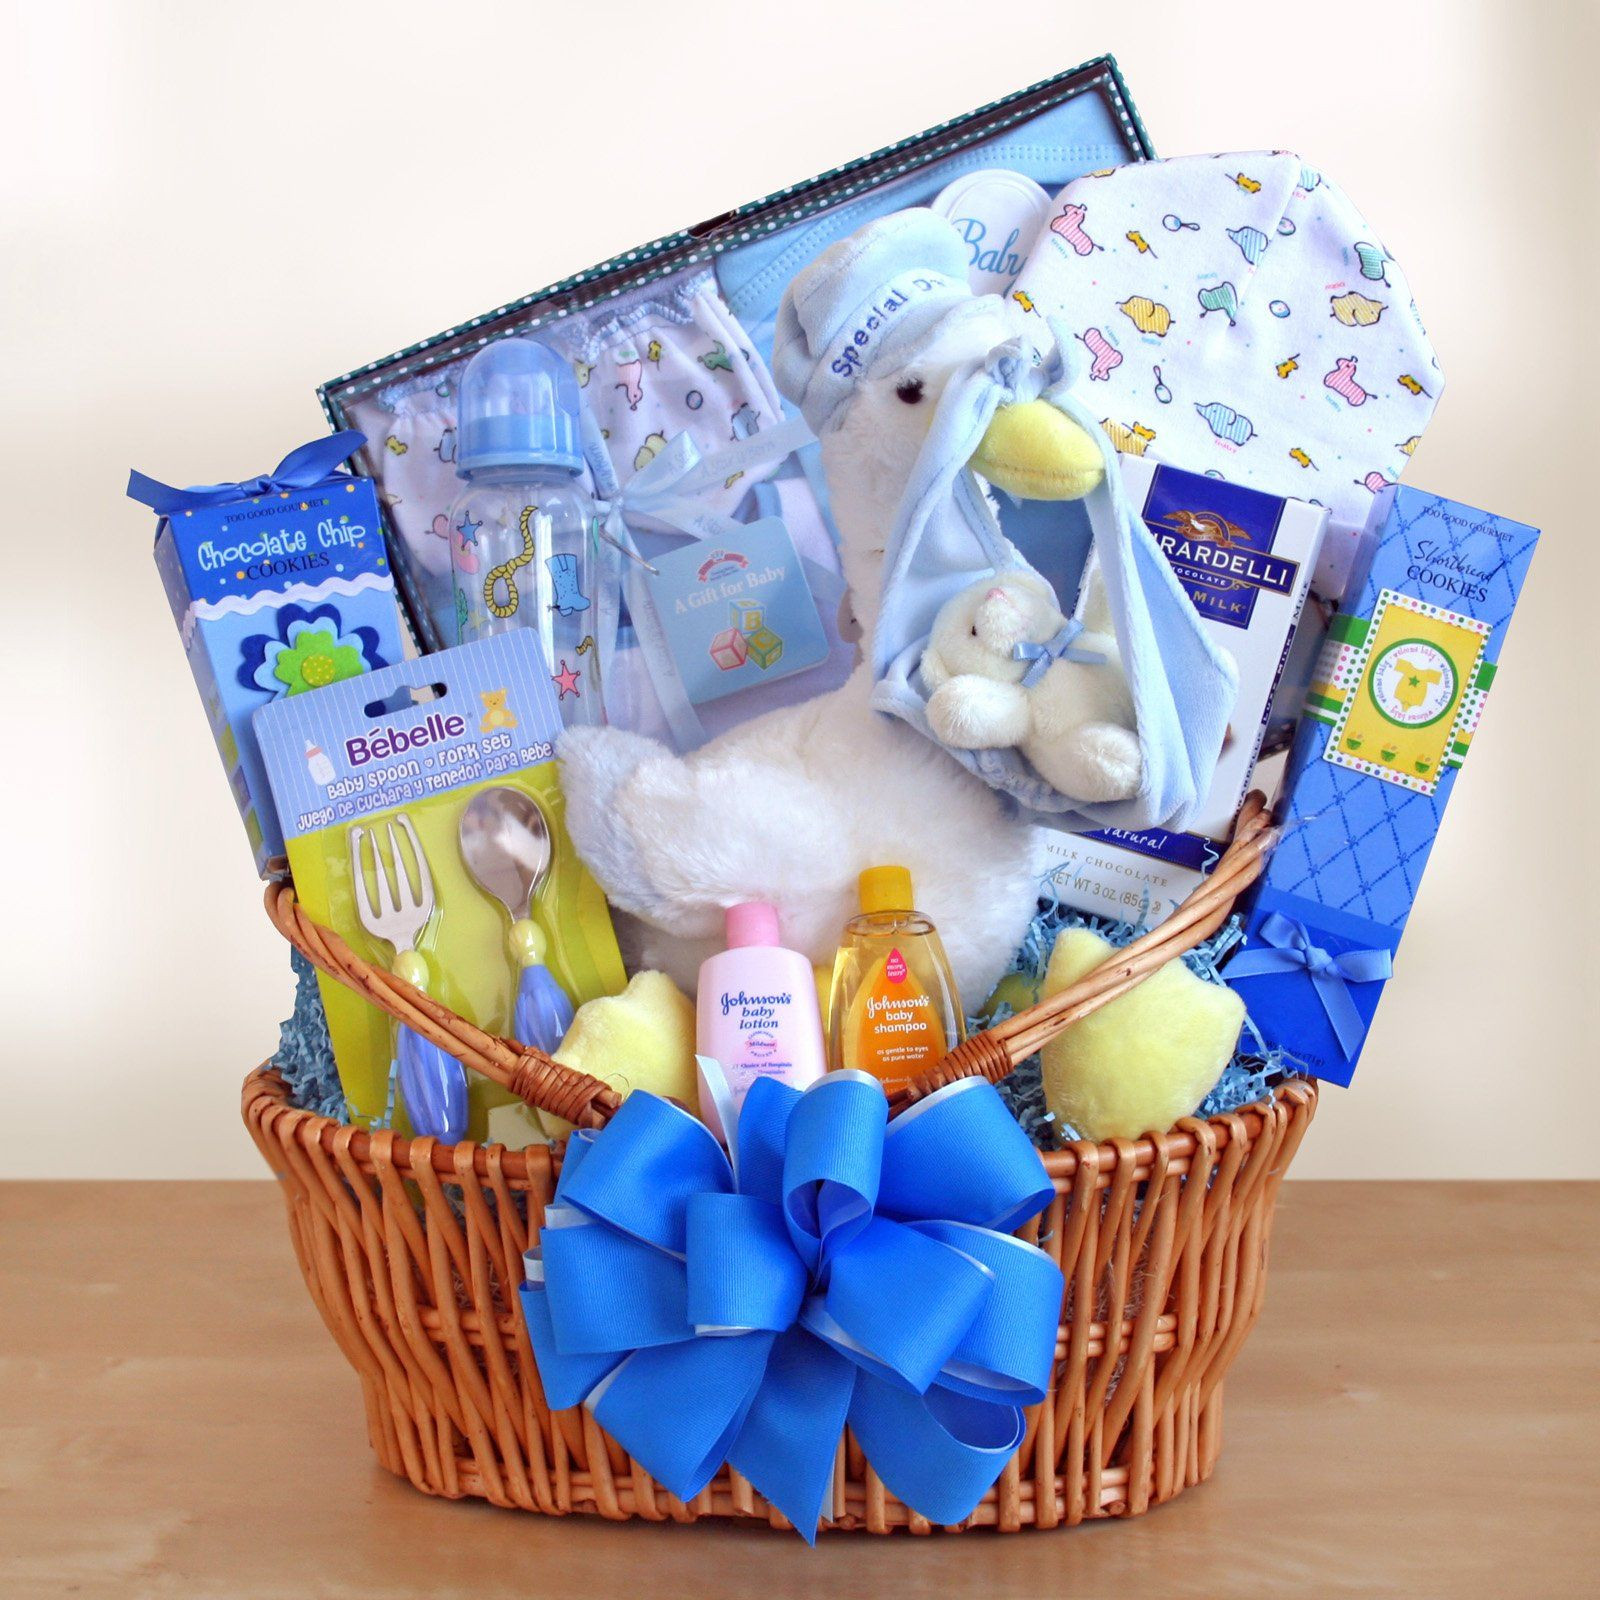 Gift Ideas For Baby Boys
 Special Stork Delivery Baby Boy Gift Basket